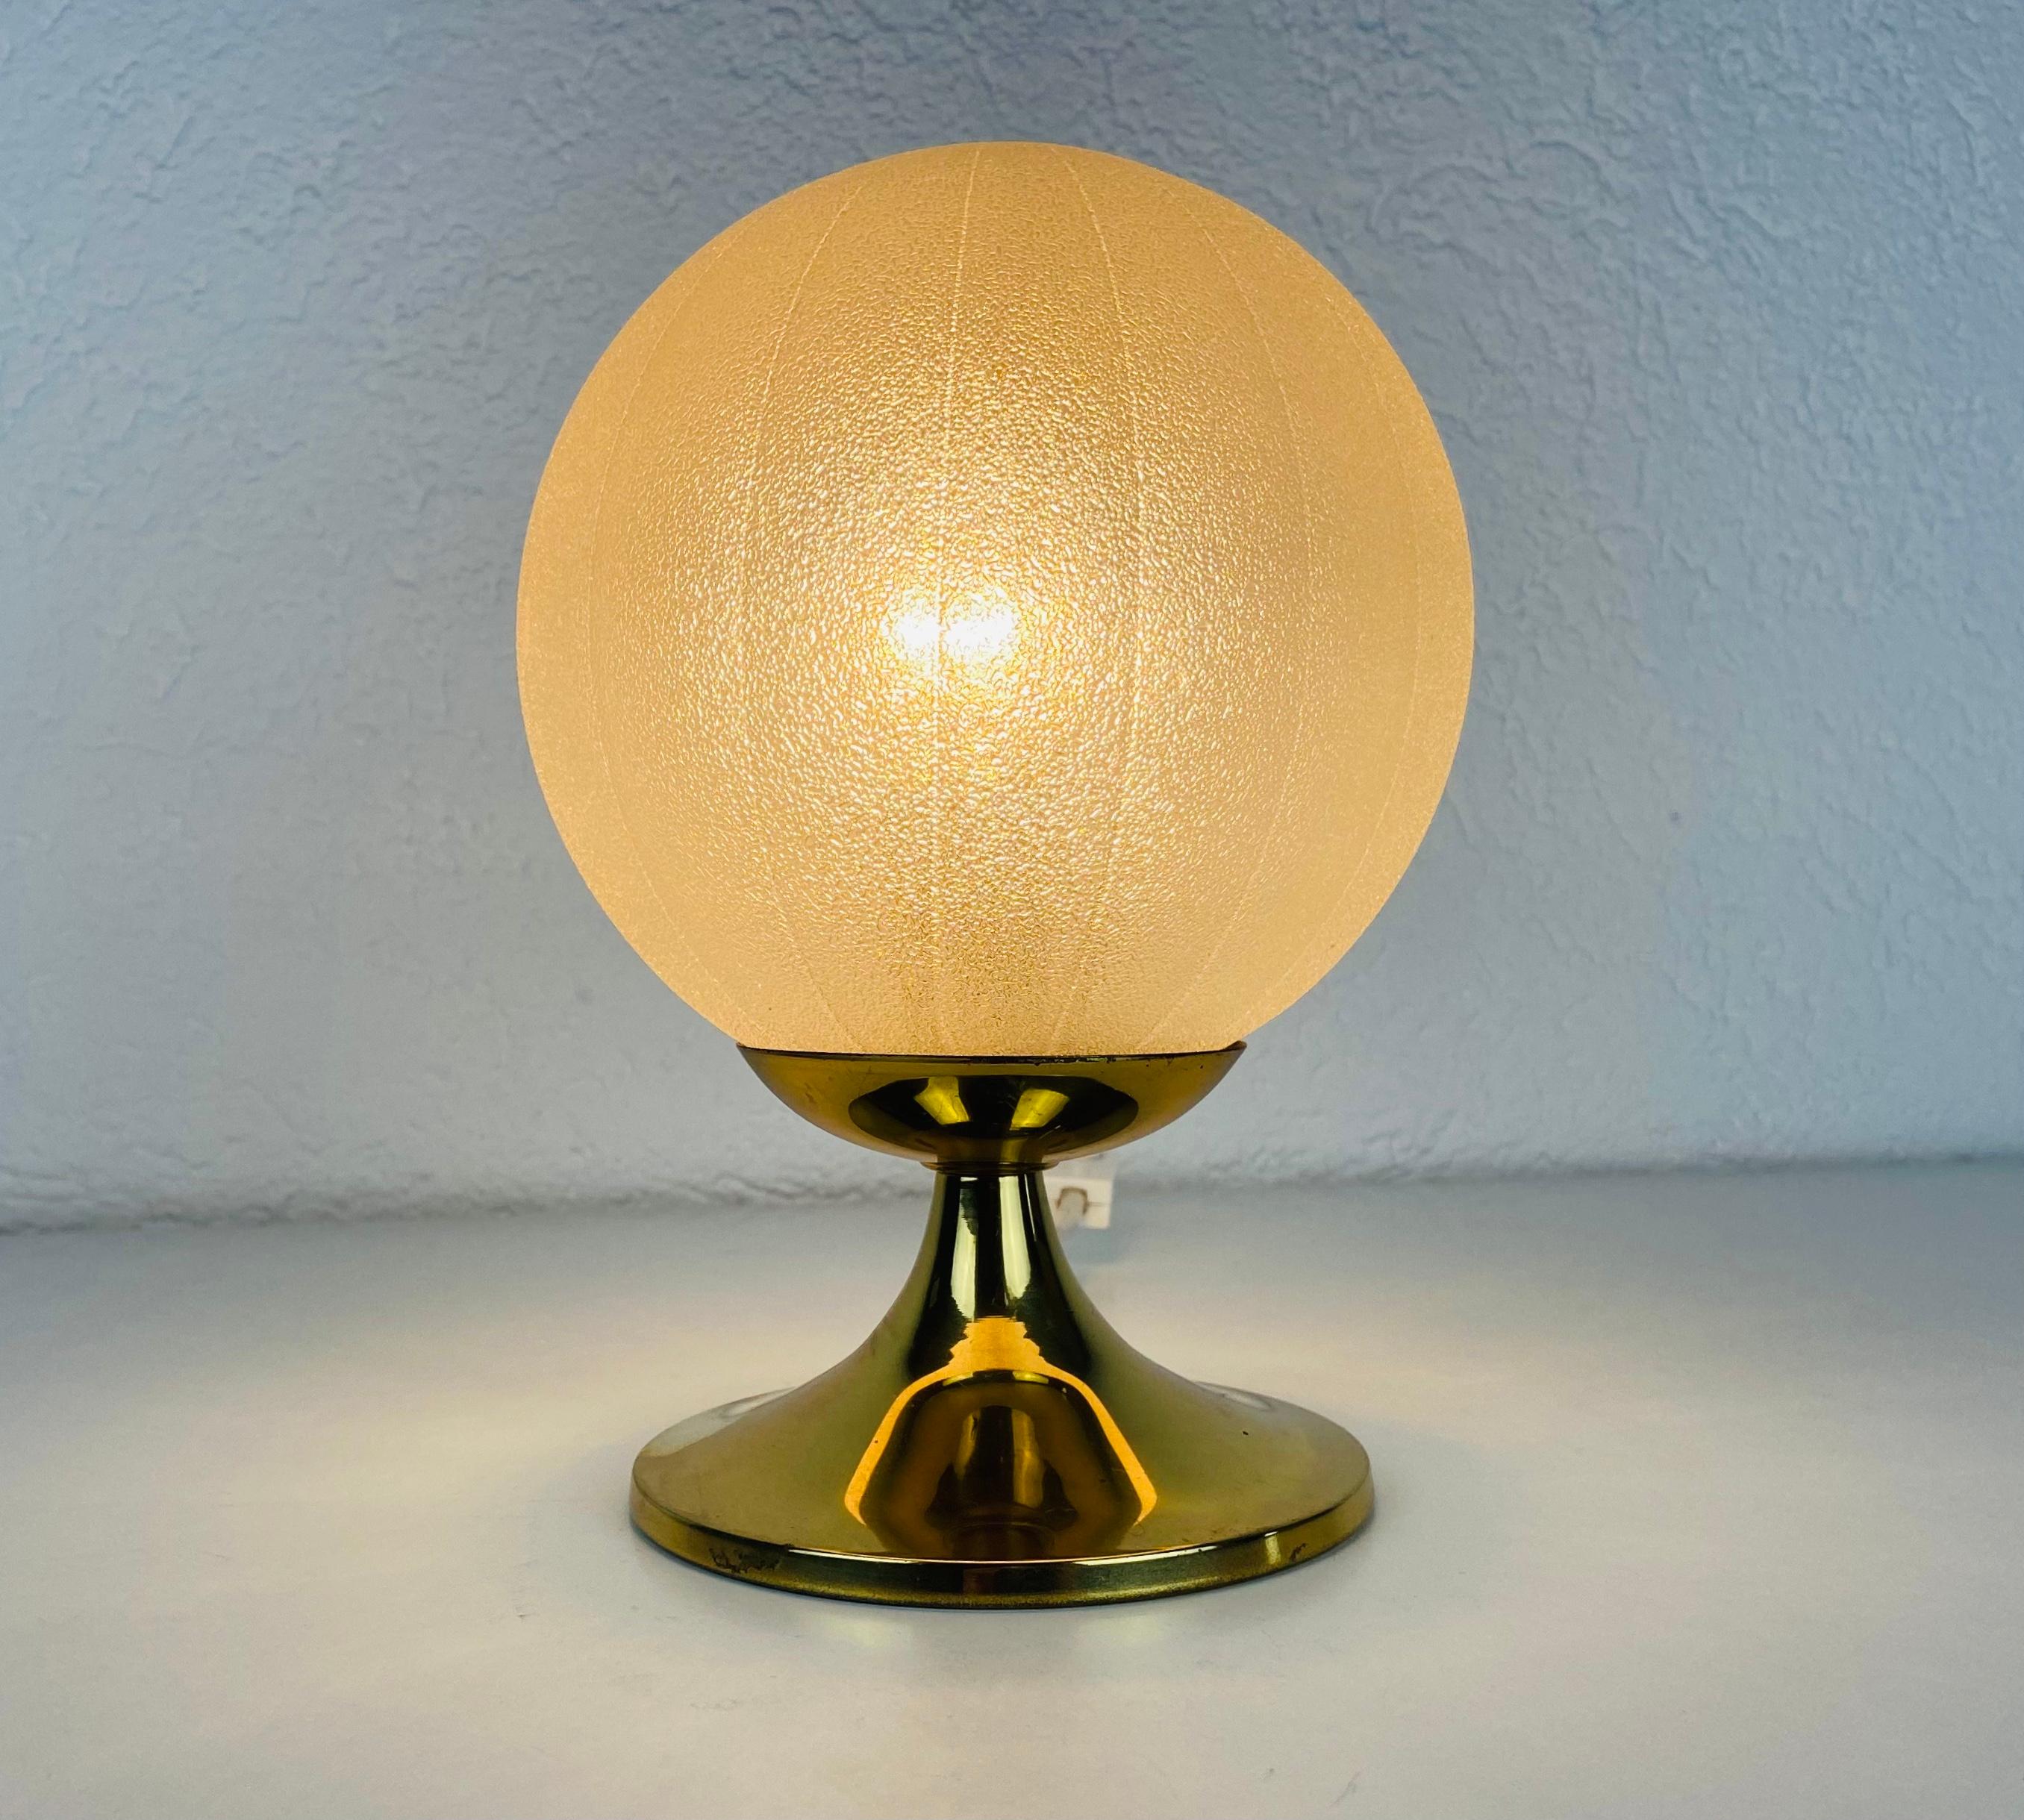 A beautiful table lamp by Doria made in Germany in the 1970s. It has a brass base and the glass shade is made of frosted ice glass. It is in very good vintage condition.

The light requires one E14 light. Works with both 120V/220V.

Free